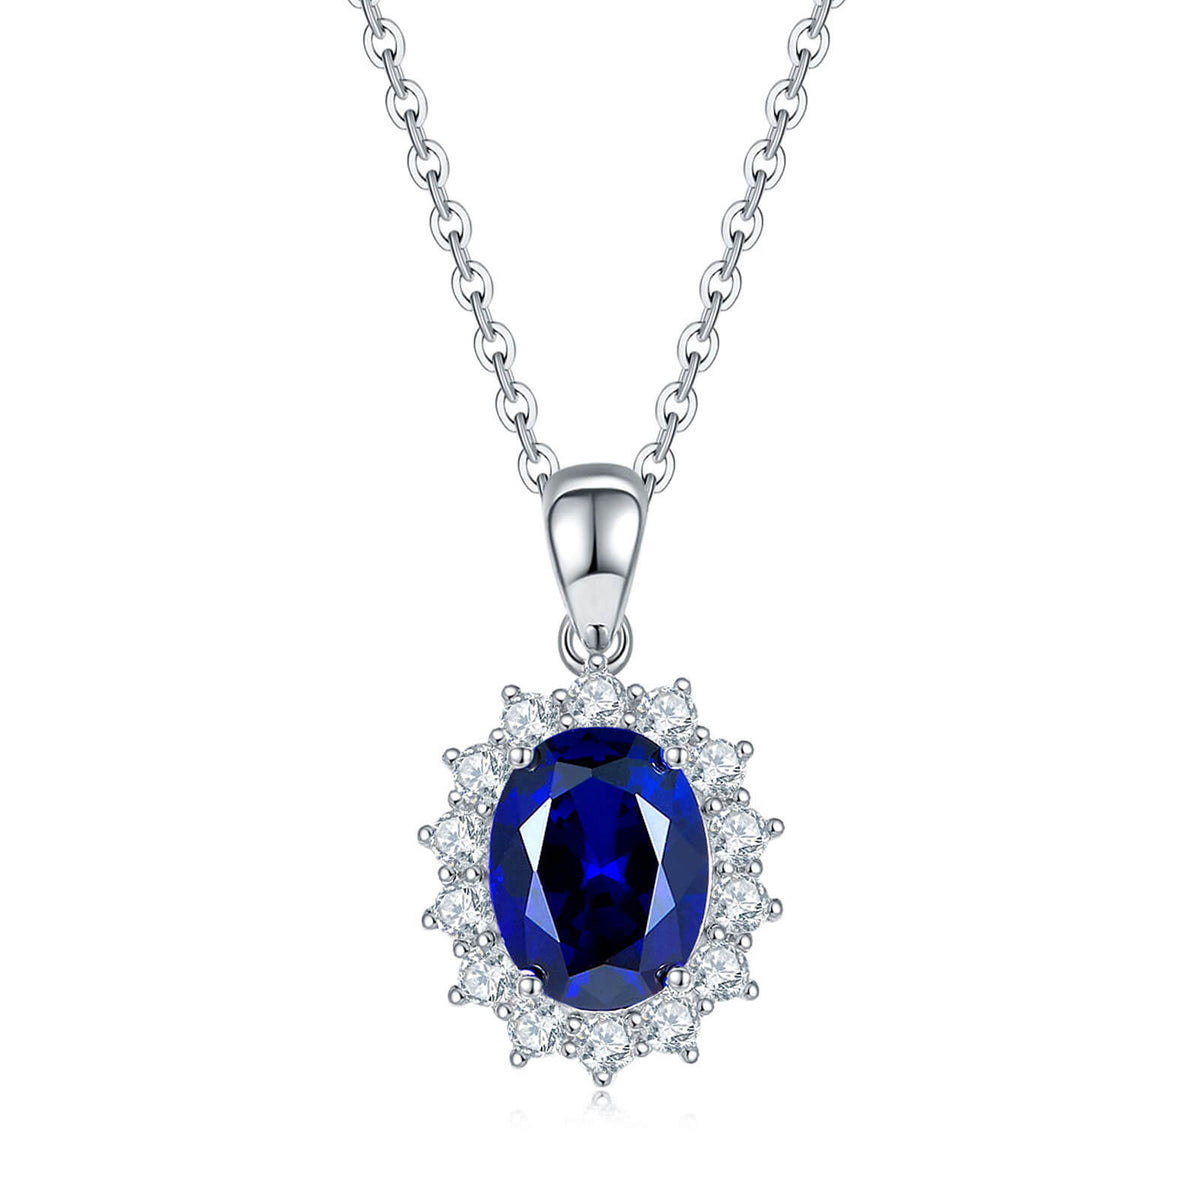 BOYA 4.72 CTW Oval Sapphire Halo Pendant Necklace in 925 Sterling Silver